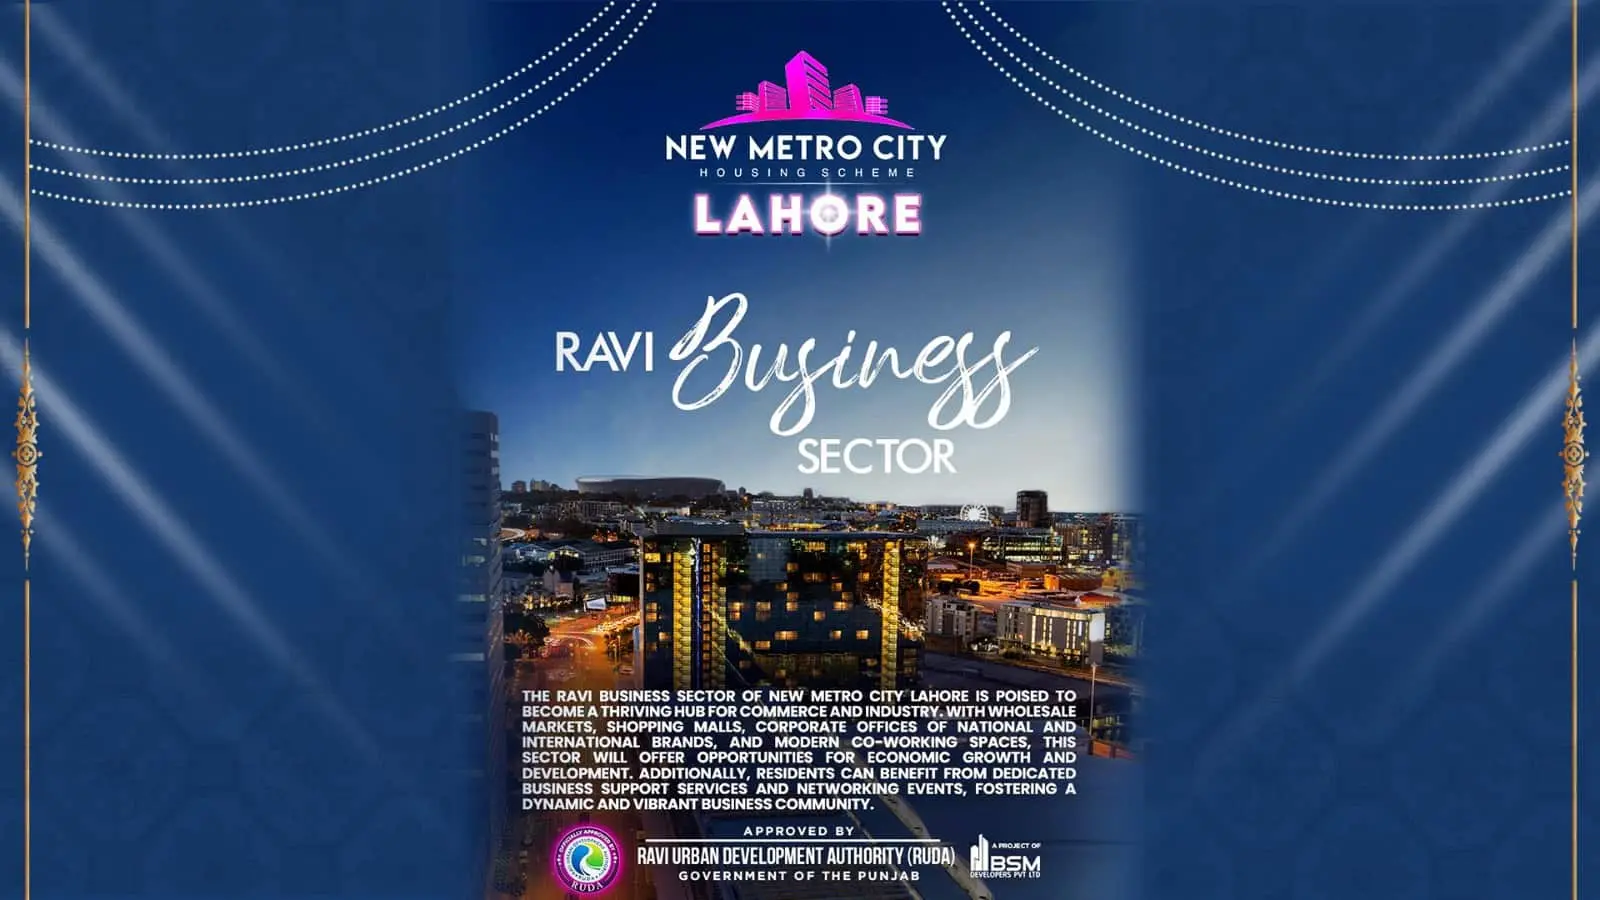 Business Sector at New Metro City Lahore